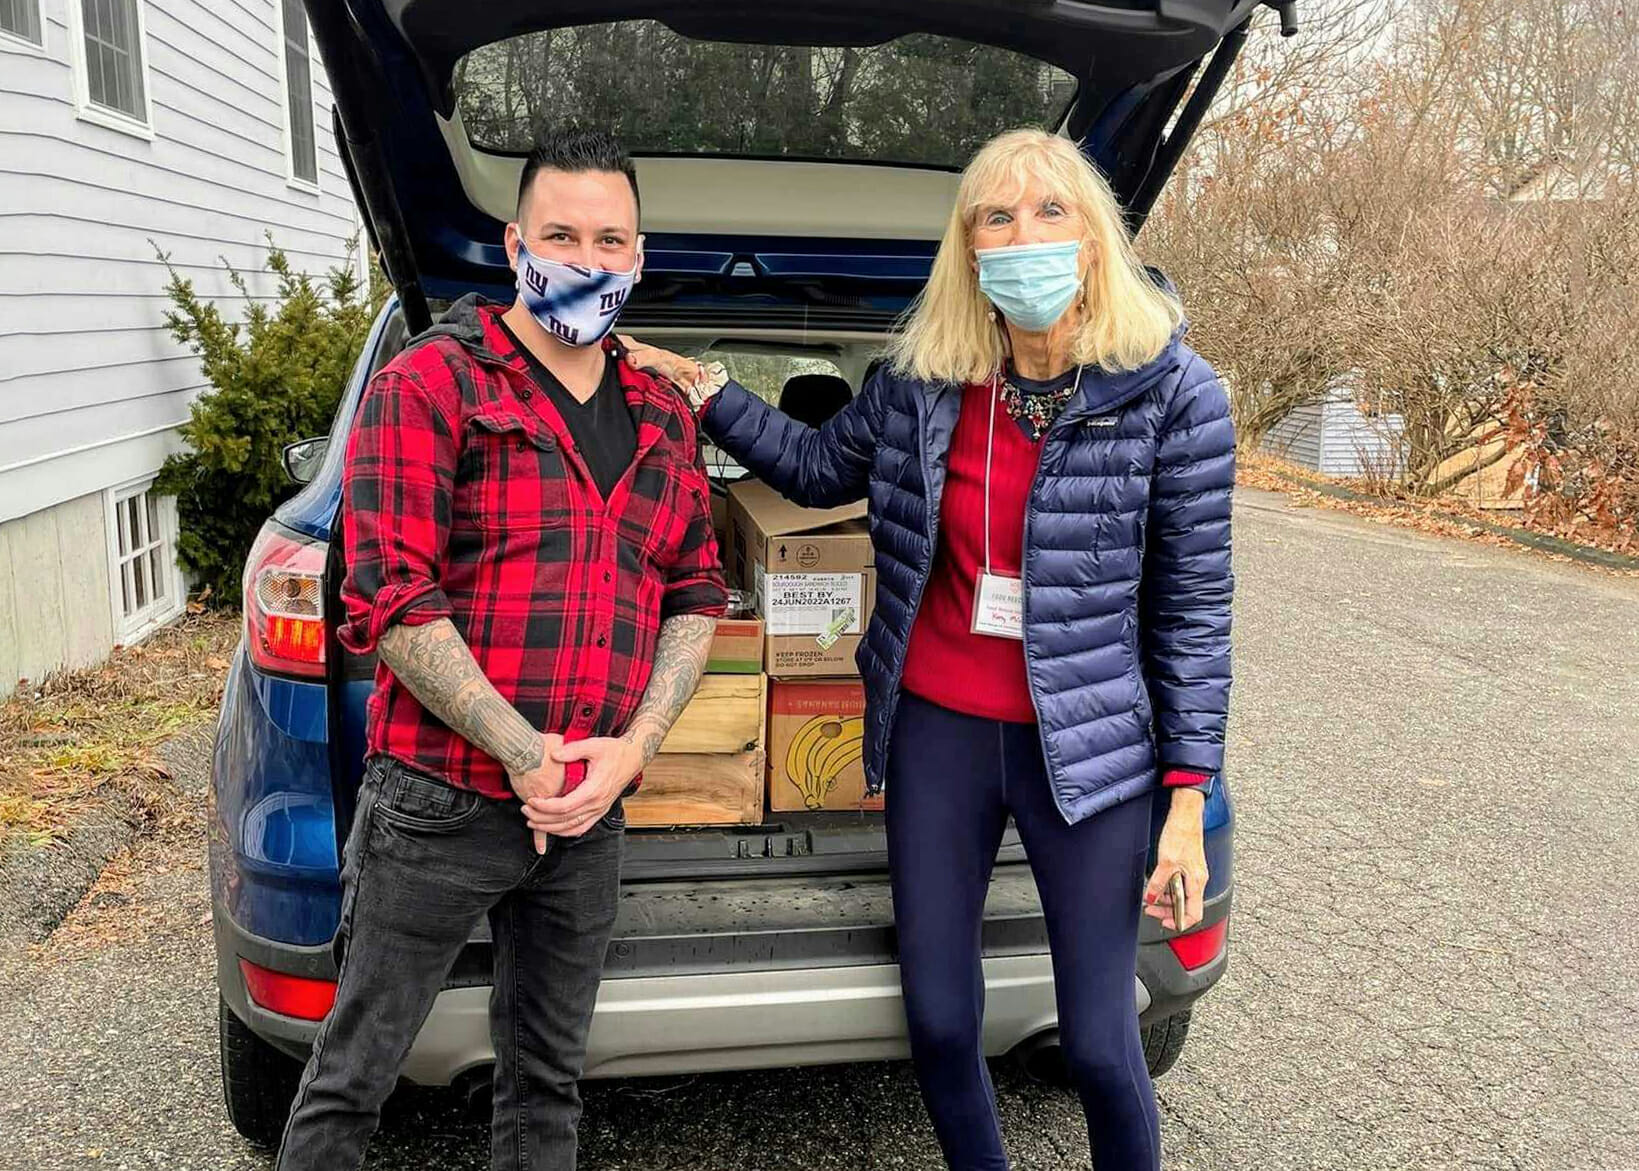 Zak Richie, Prime Time House clubhouse manager, and Kathy Minck, site director of Food Rescue US – NWCT, deliver fresh produce from The Market CT in Bantam.